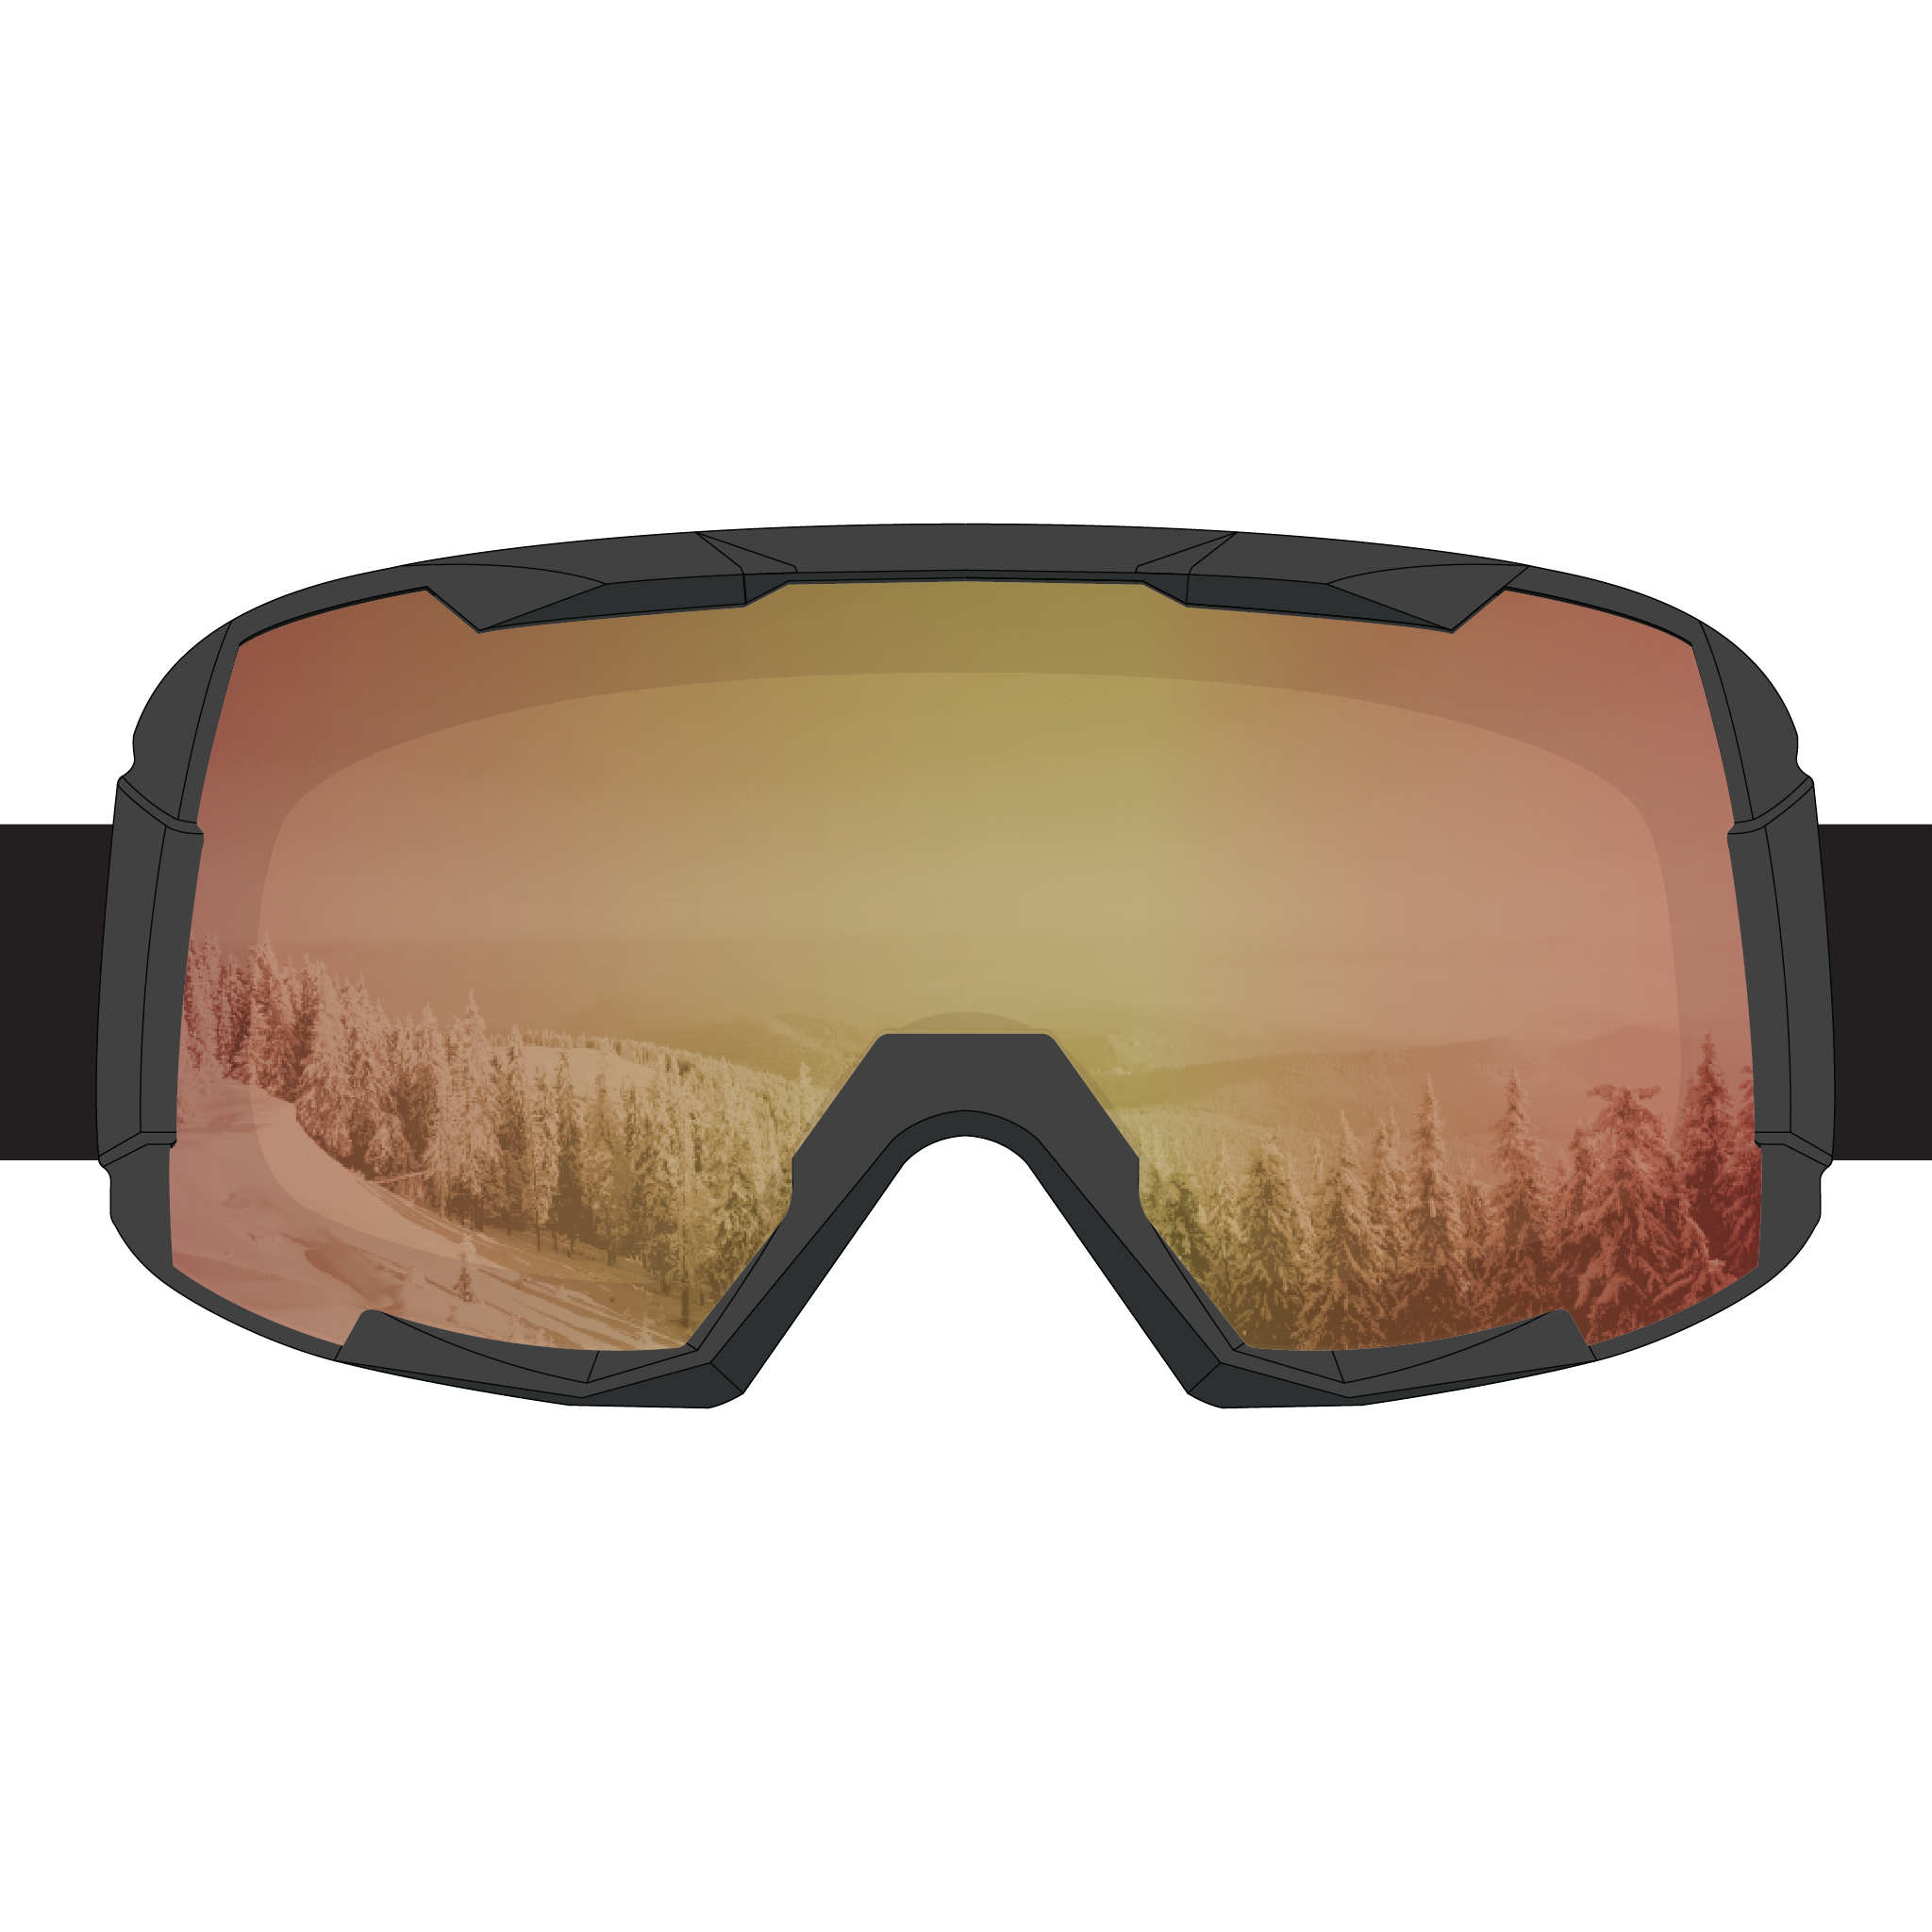 STAGE Big Punk Ski Goggle with Red Revo Lens